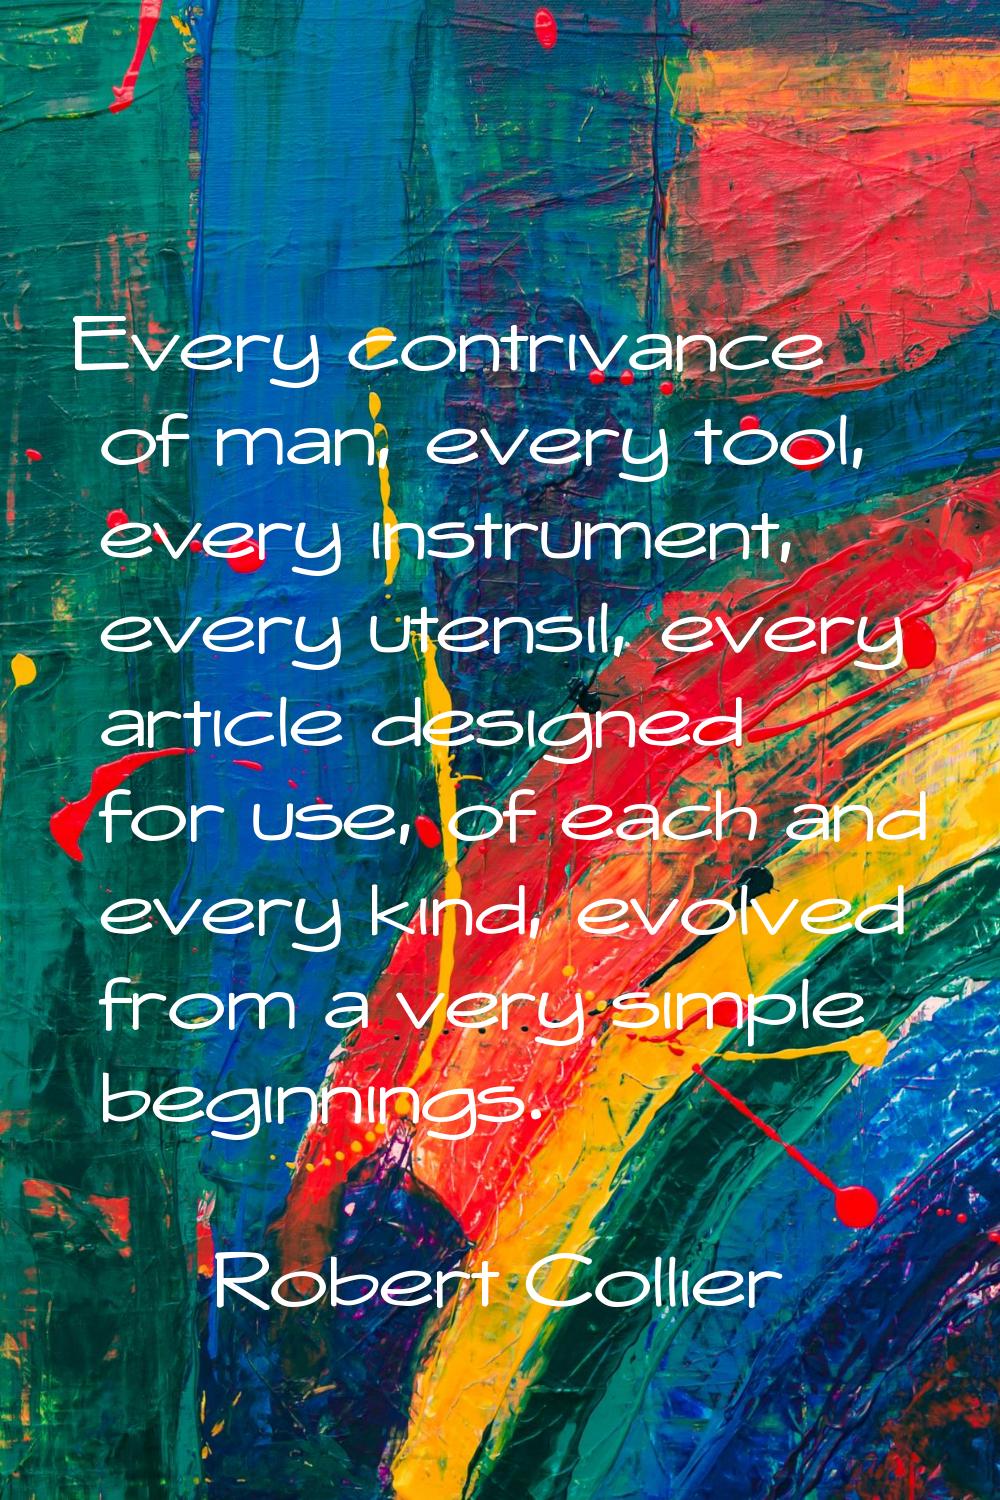 Every contrivance of man, every tool, every instrument, every utensil, every article designed for u